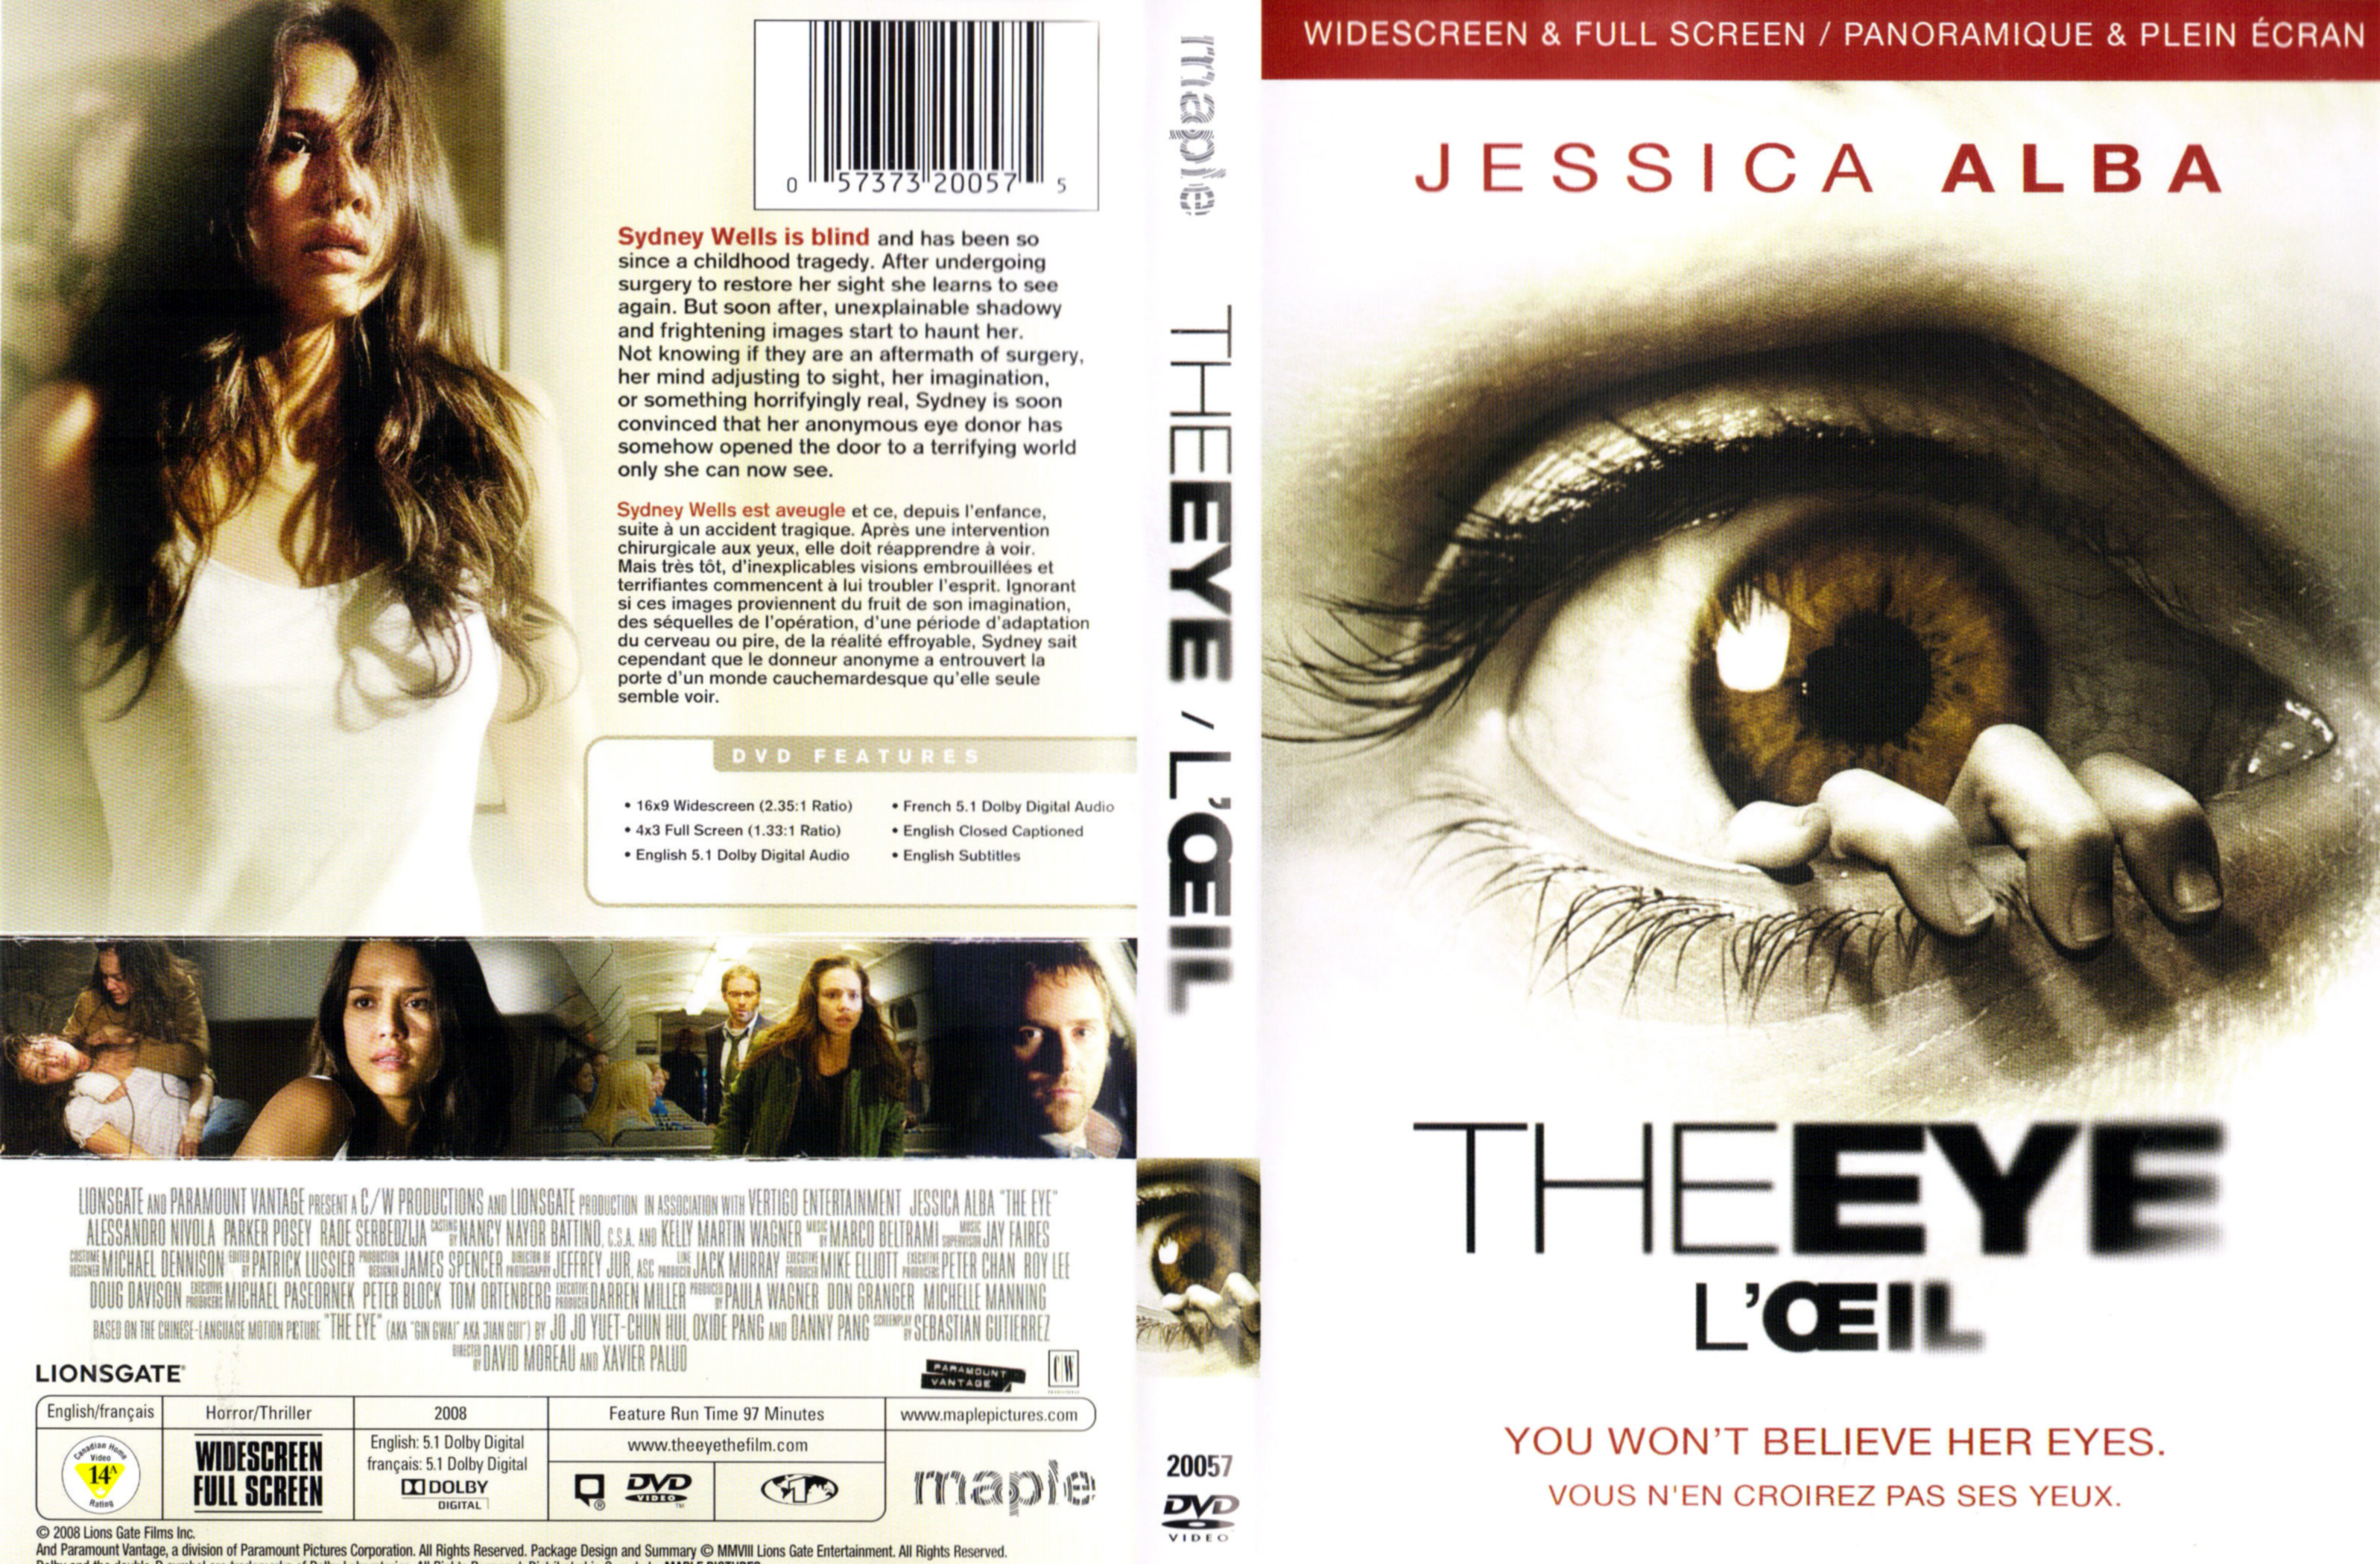 Jaquette DVD The eye - L